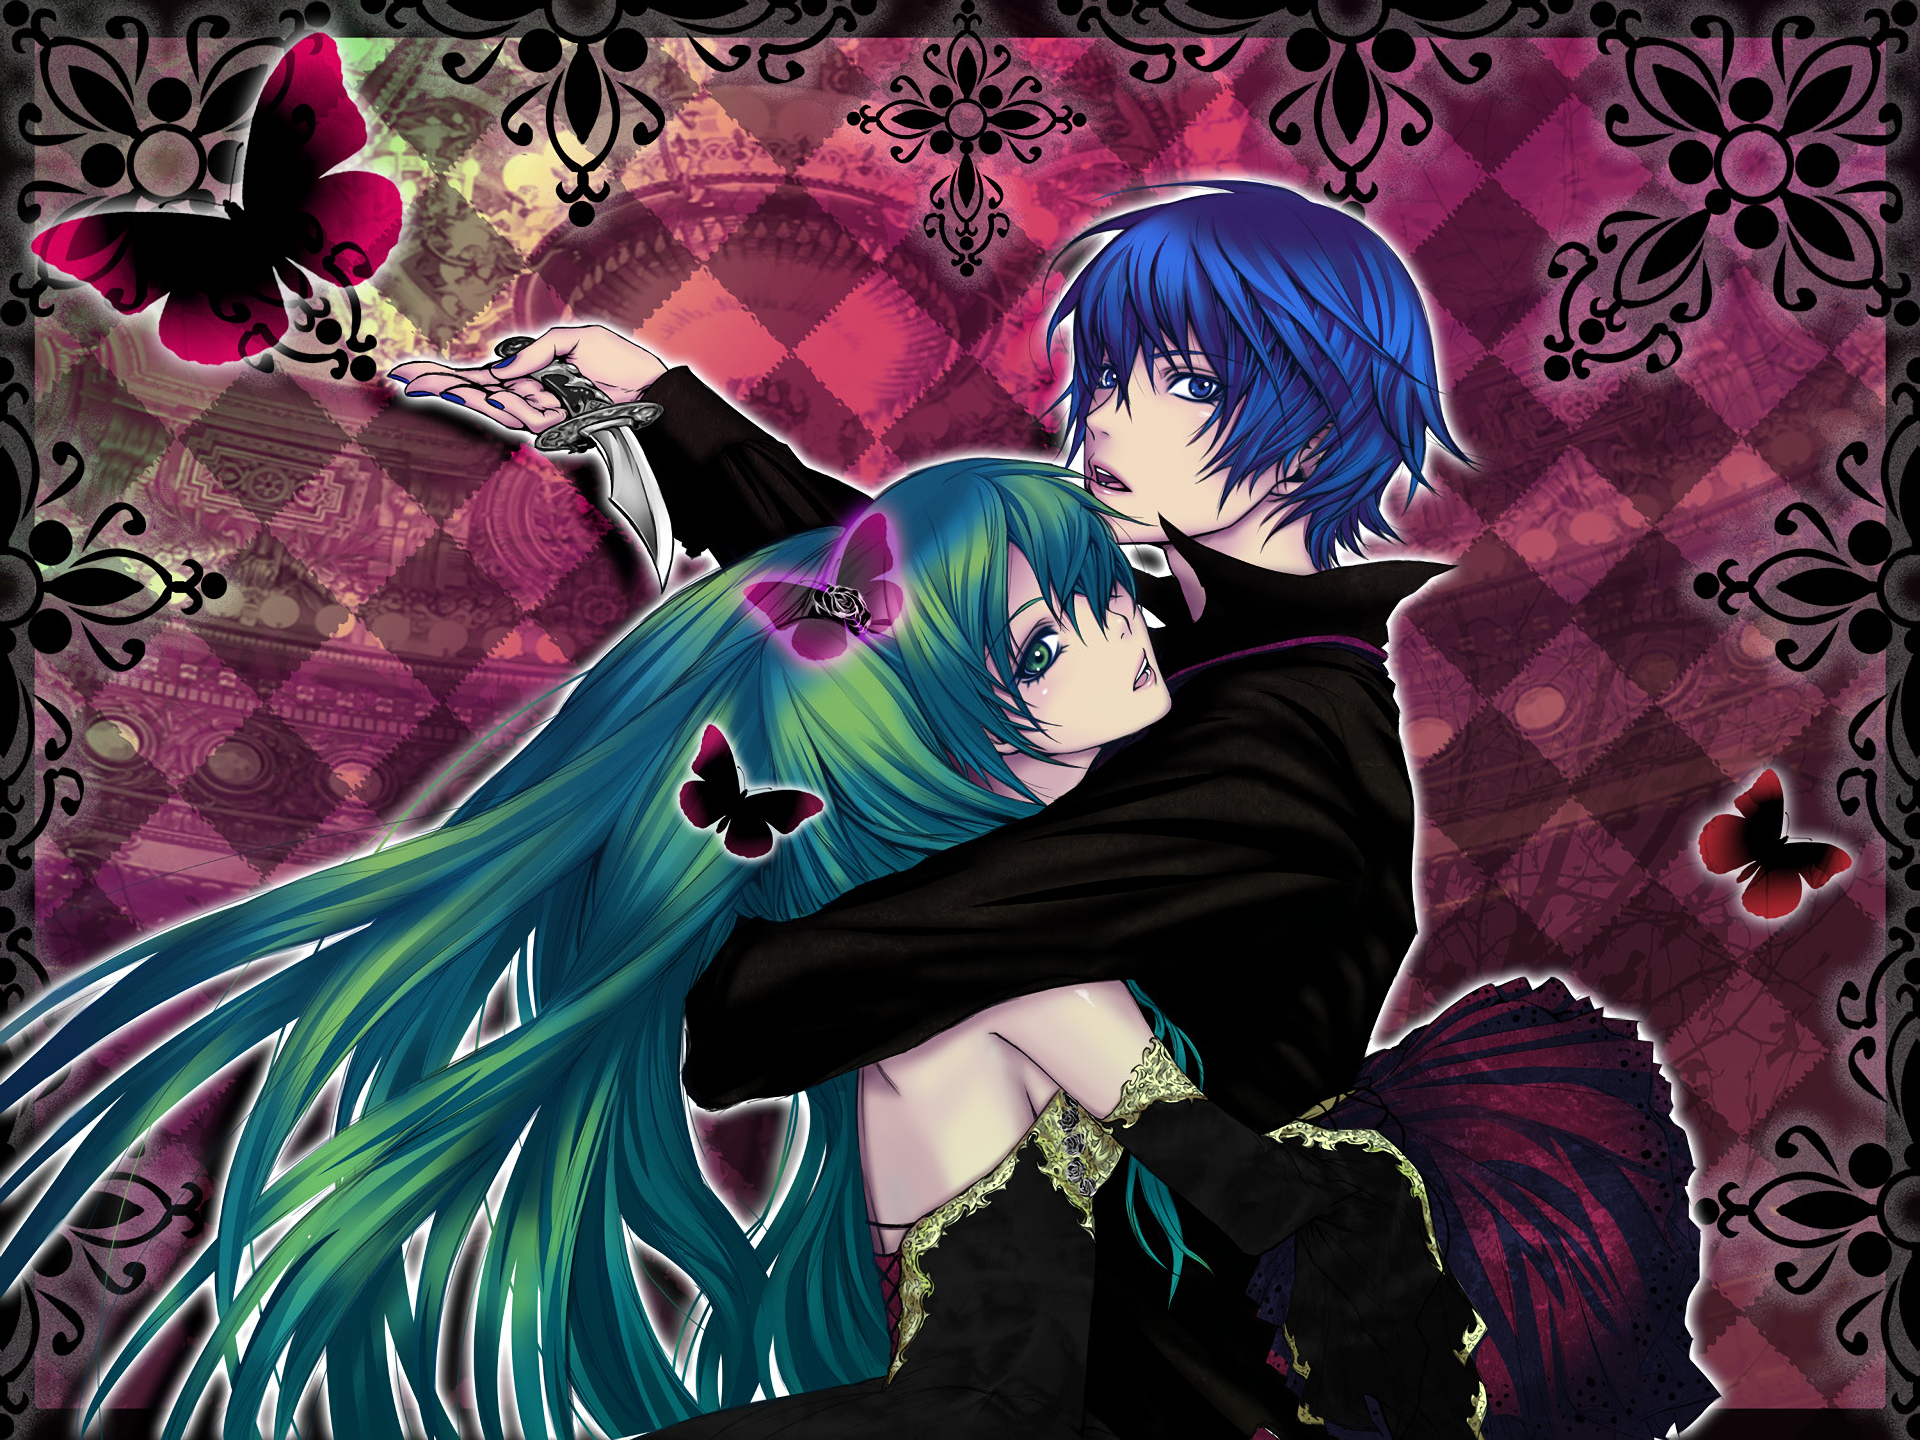 Hatsune Miku and Kaito from Vocaloid, posing with a butterfly and knife against a blue background.